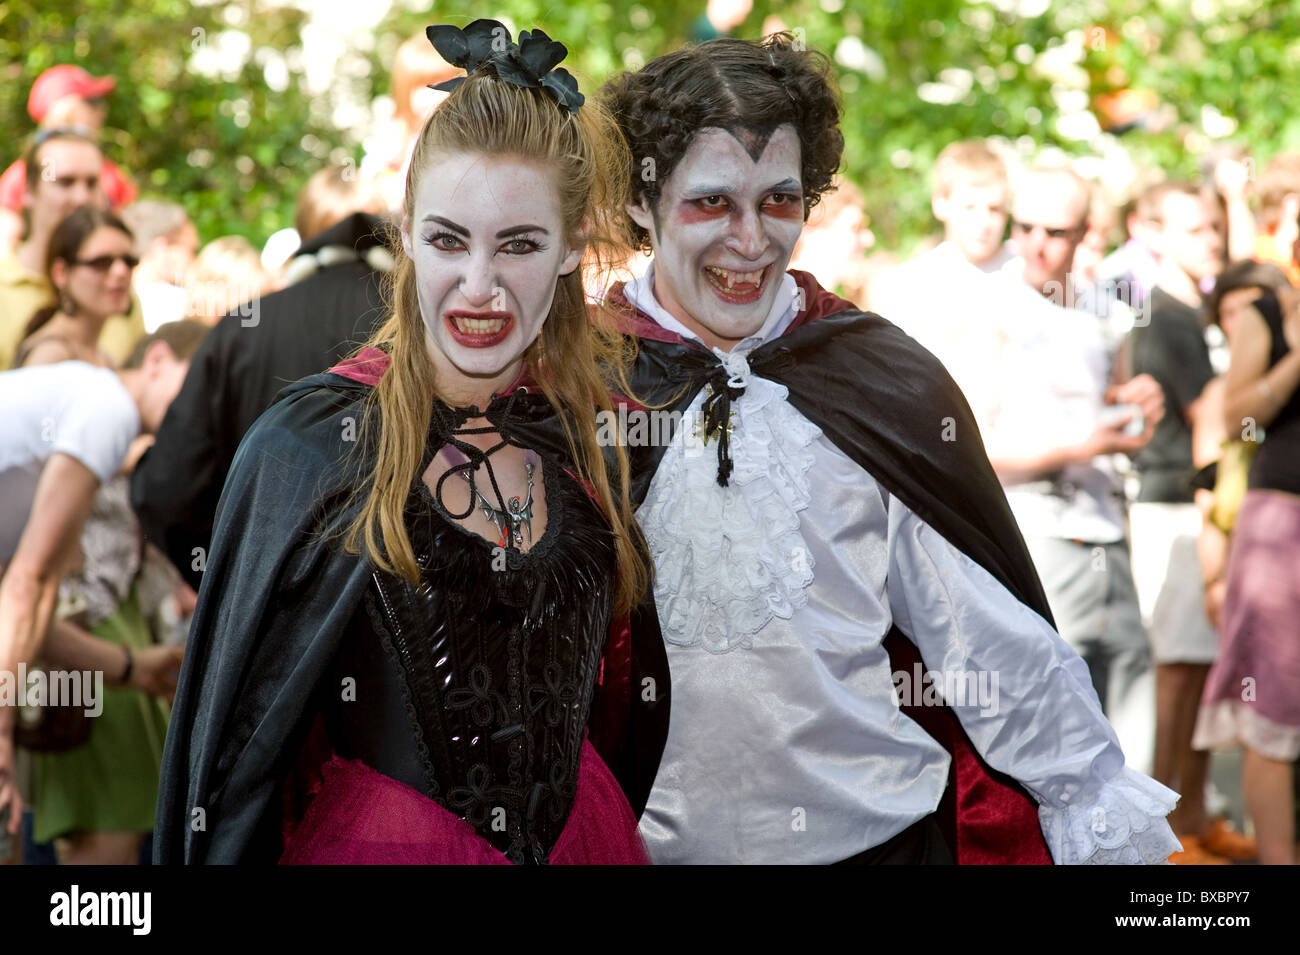 A couple dressed as vampires at the Carnival of Cultures, Berlin, Germany Stock Photo